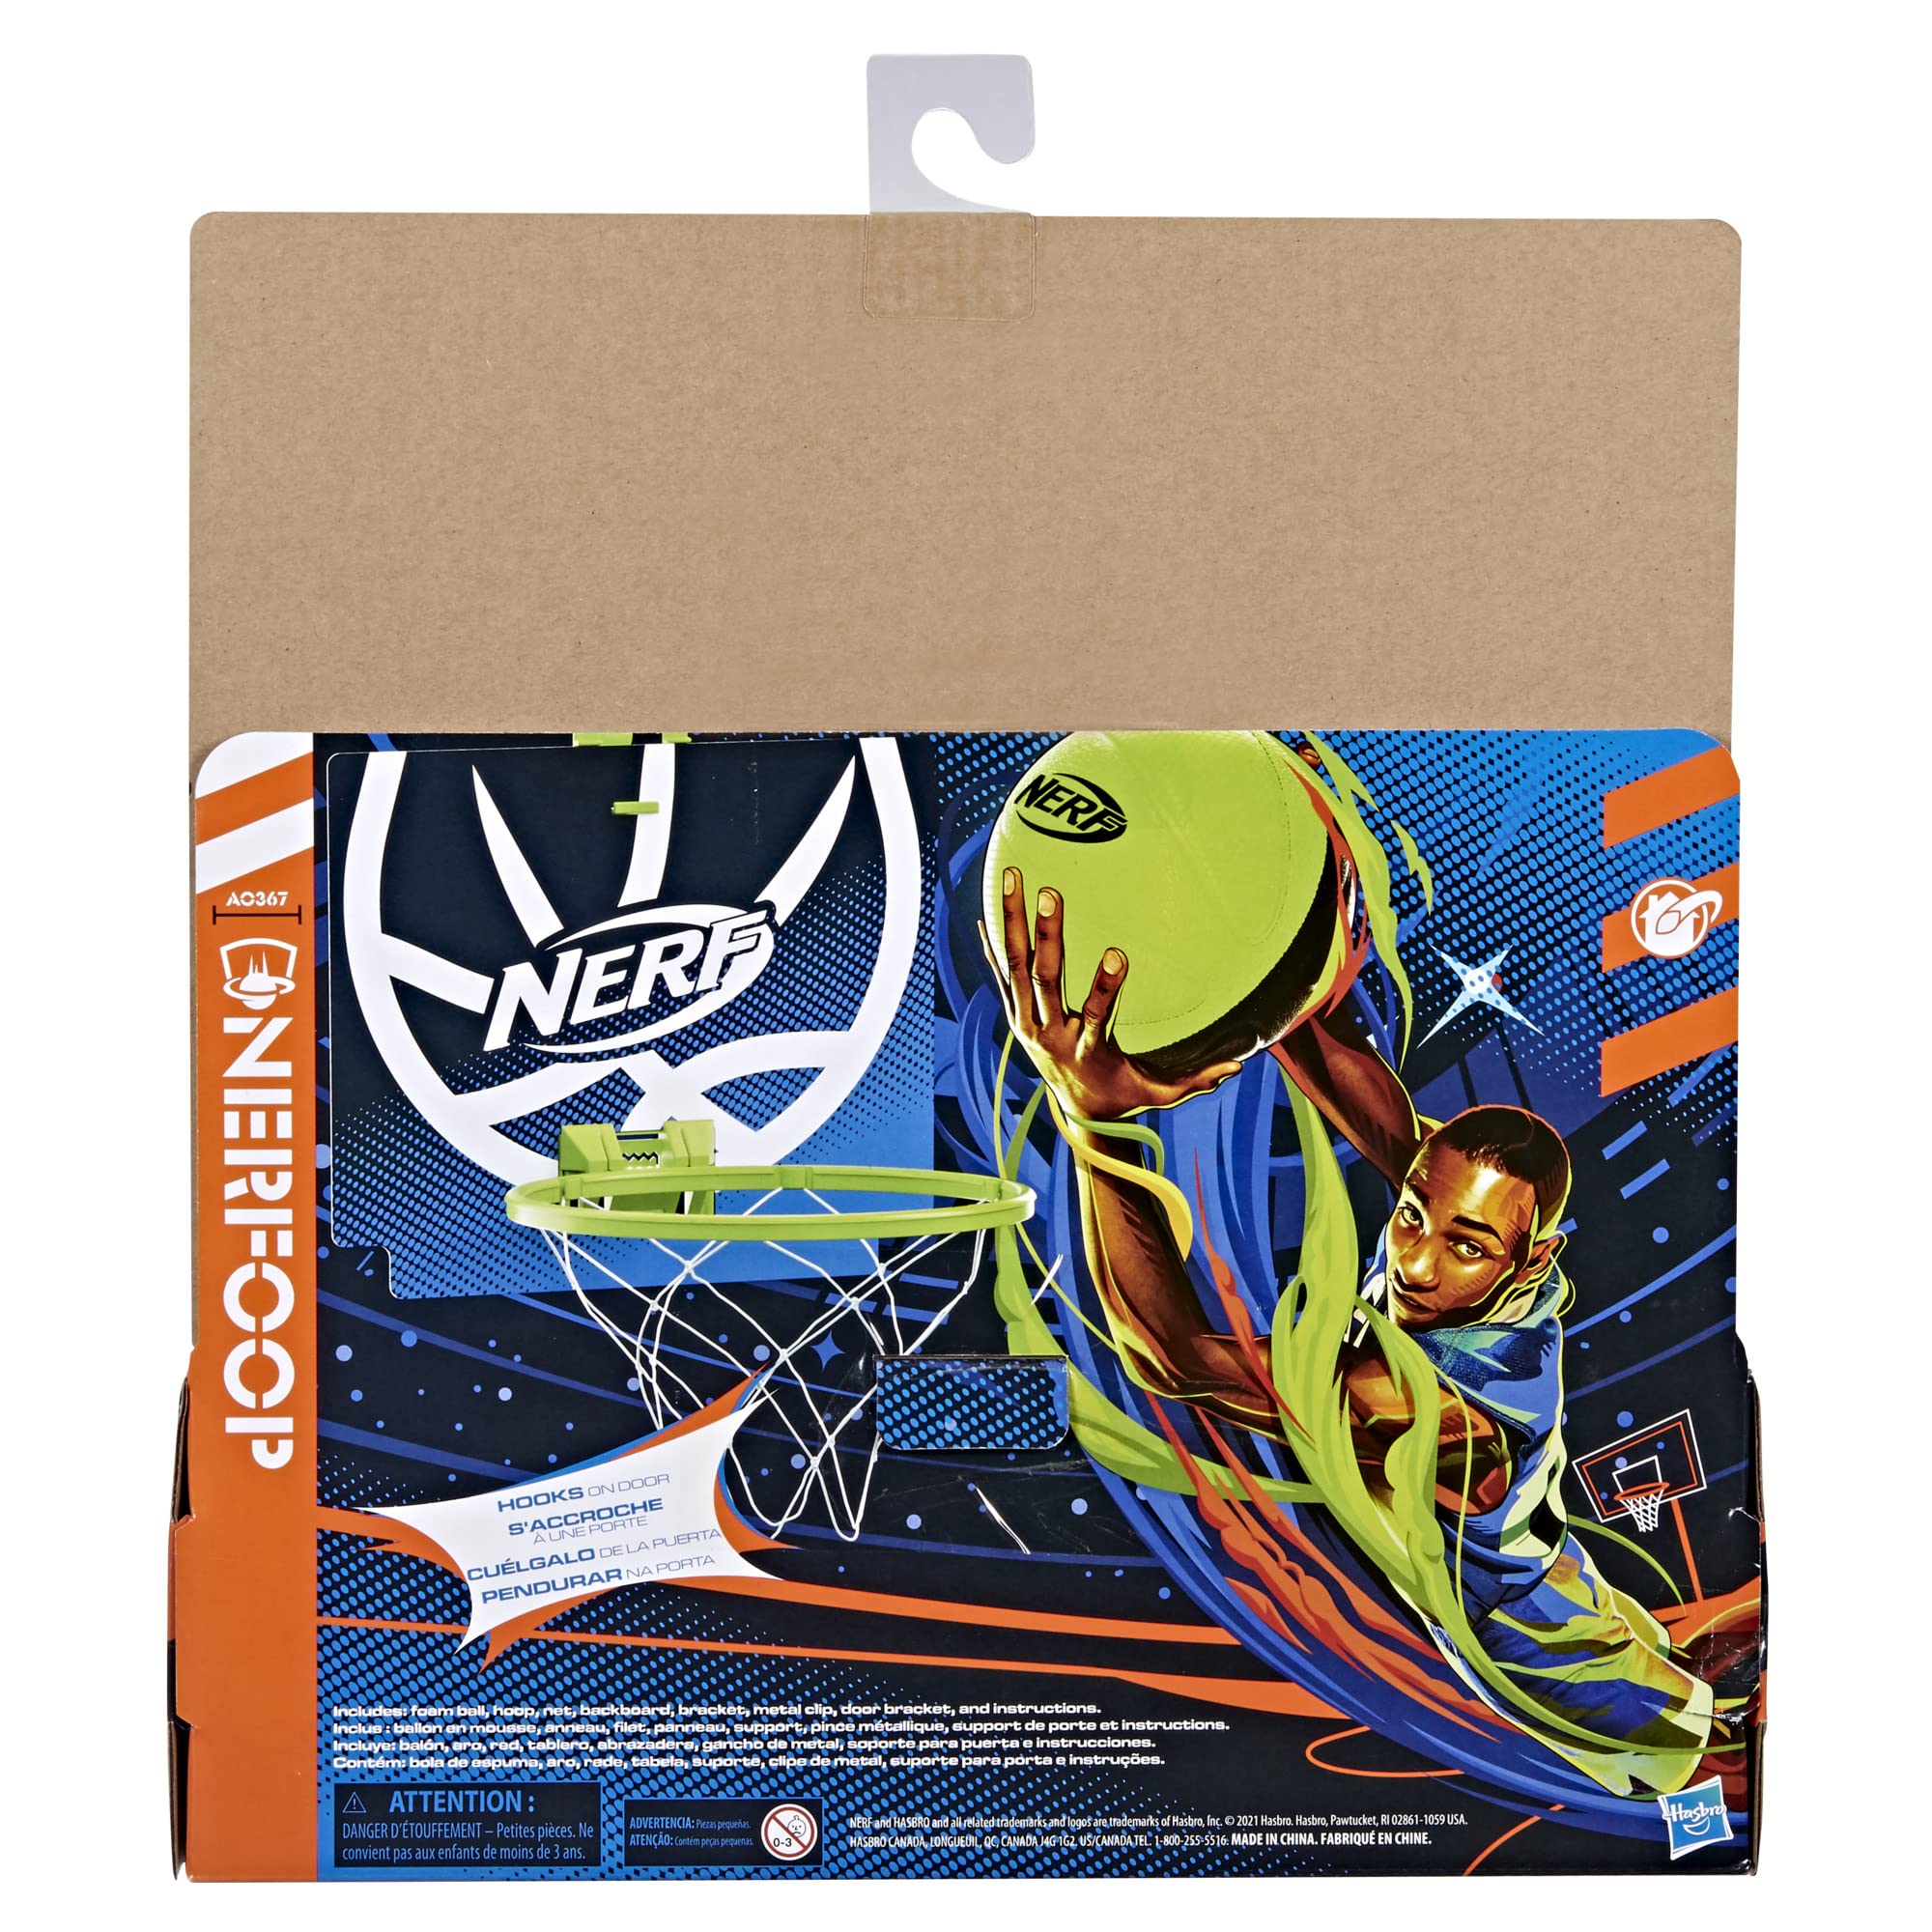 NERF Nerfoop - The Classic Mini Foam Basketball and Hoop - Hooks On Doors - Indoor and Outdoor Play - A Favorite Since 1972